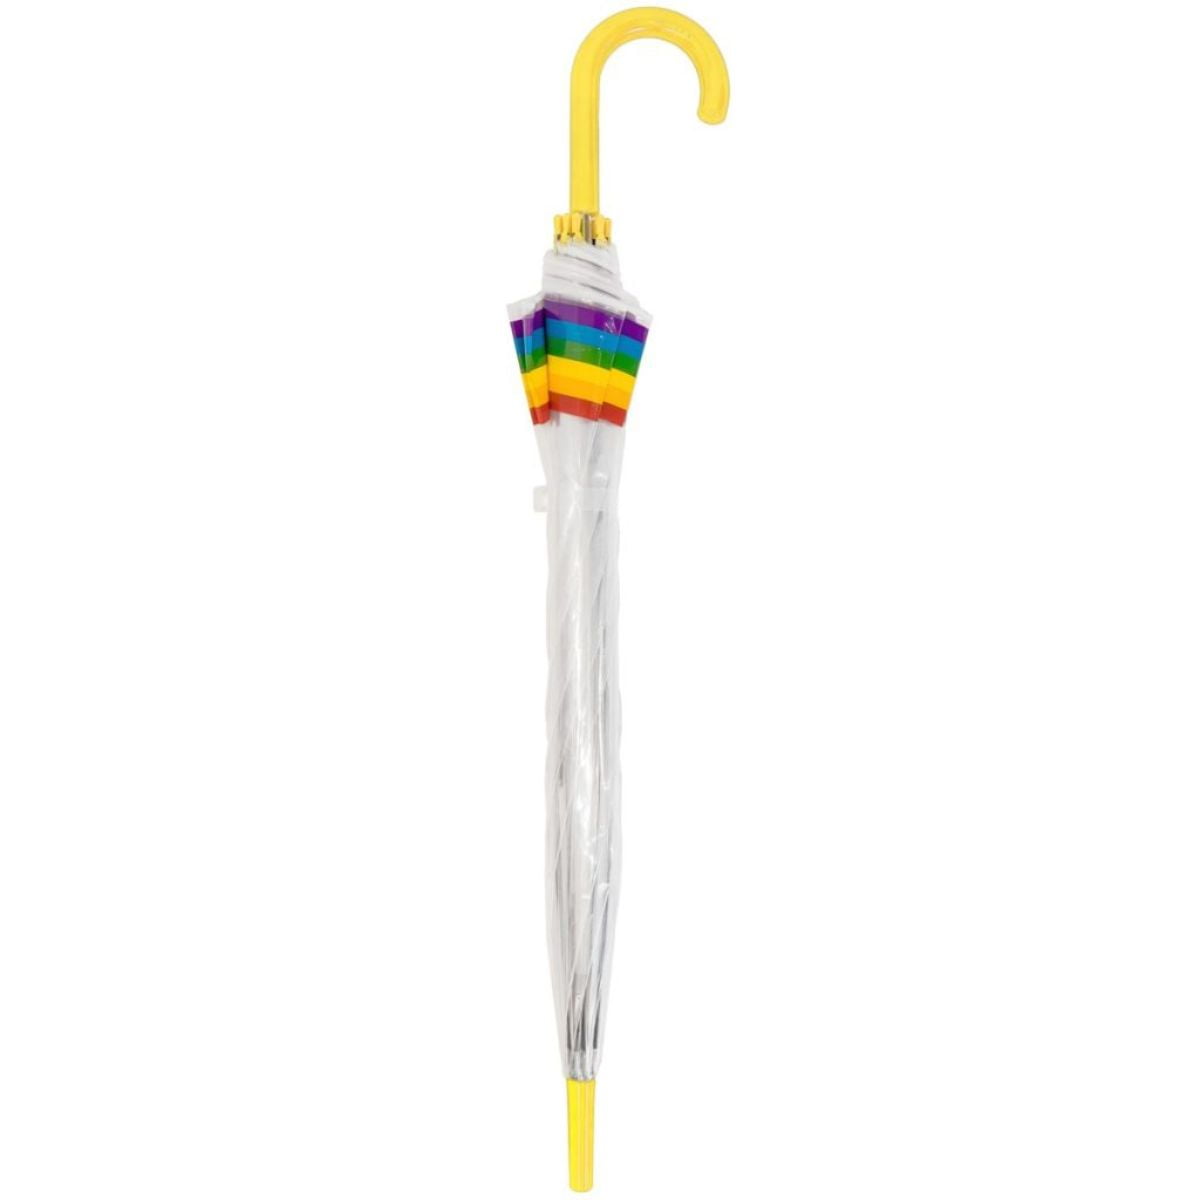 Rainbow Dome Umbrella with yellow handle and tip - closed